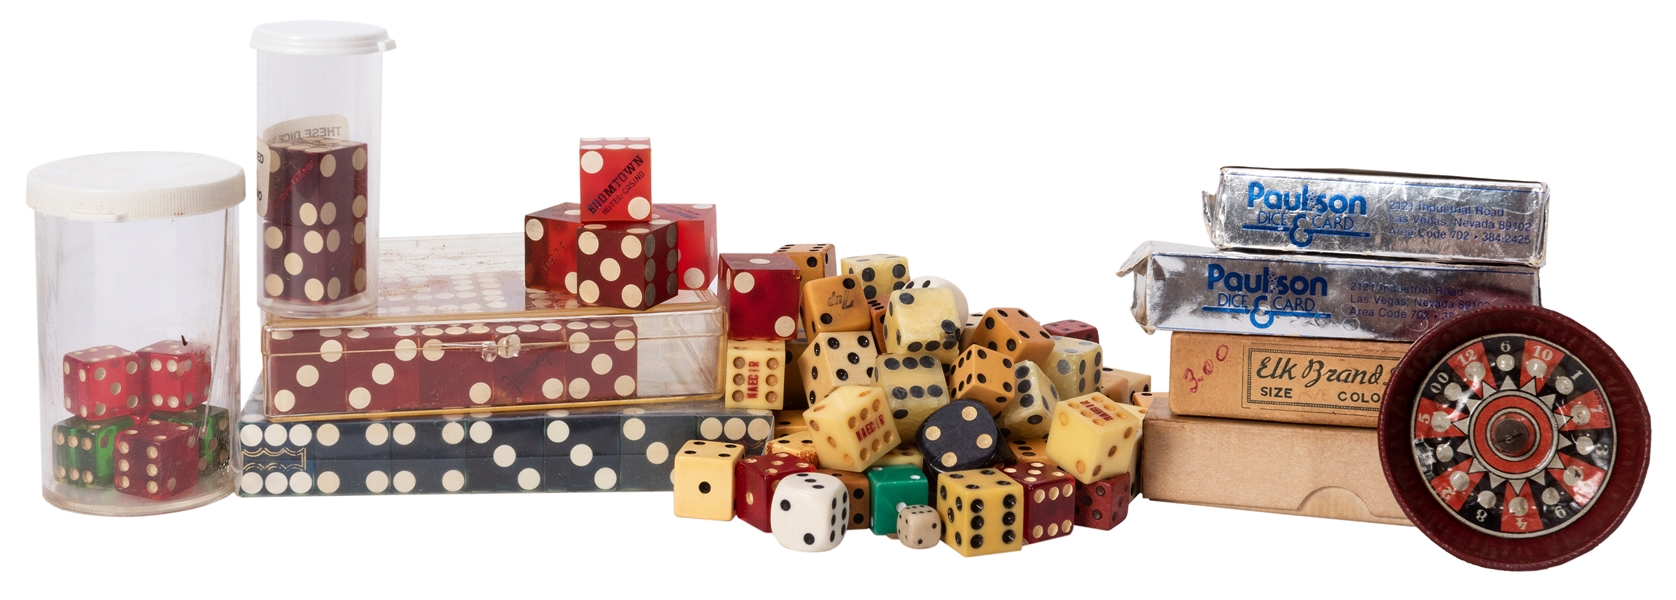 Crooked and Casino Dice. A Collection.